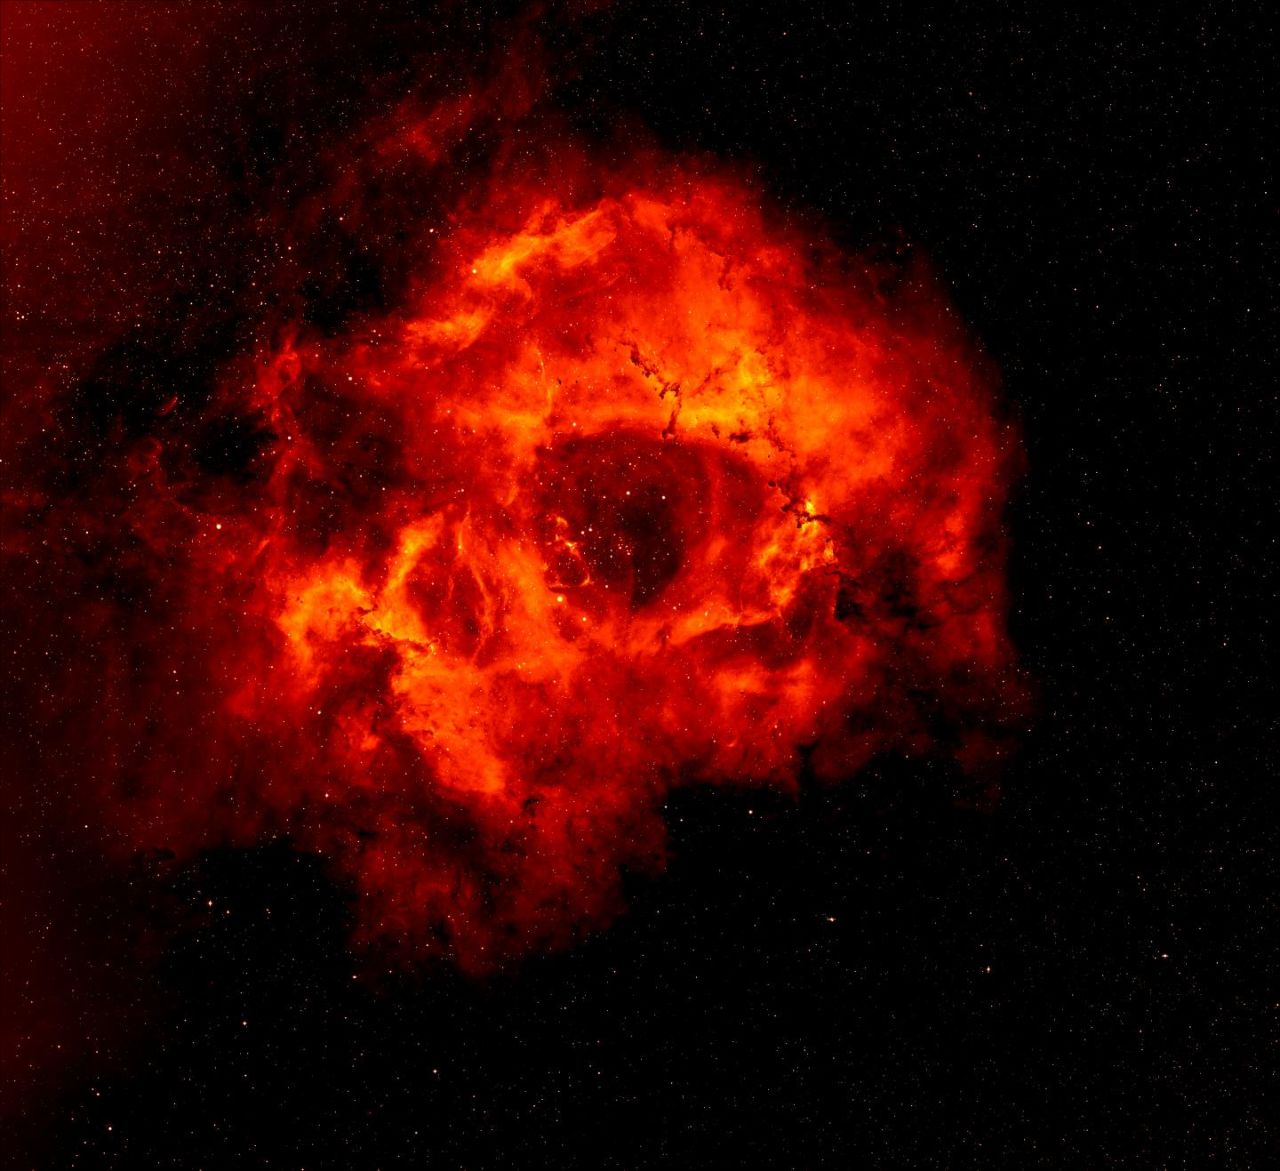 The Rosette Nebula is 5,000 light-years from Earth. The distinctive nebula, which some claim looks more like a skull, has a hole in the middle that creates the illusion of its rose-like shape. 